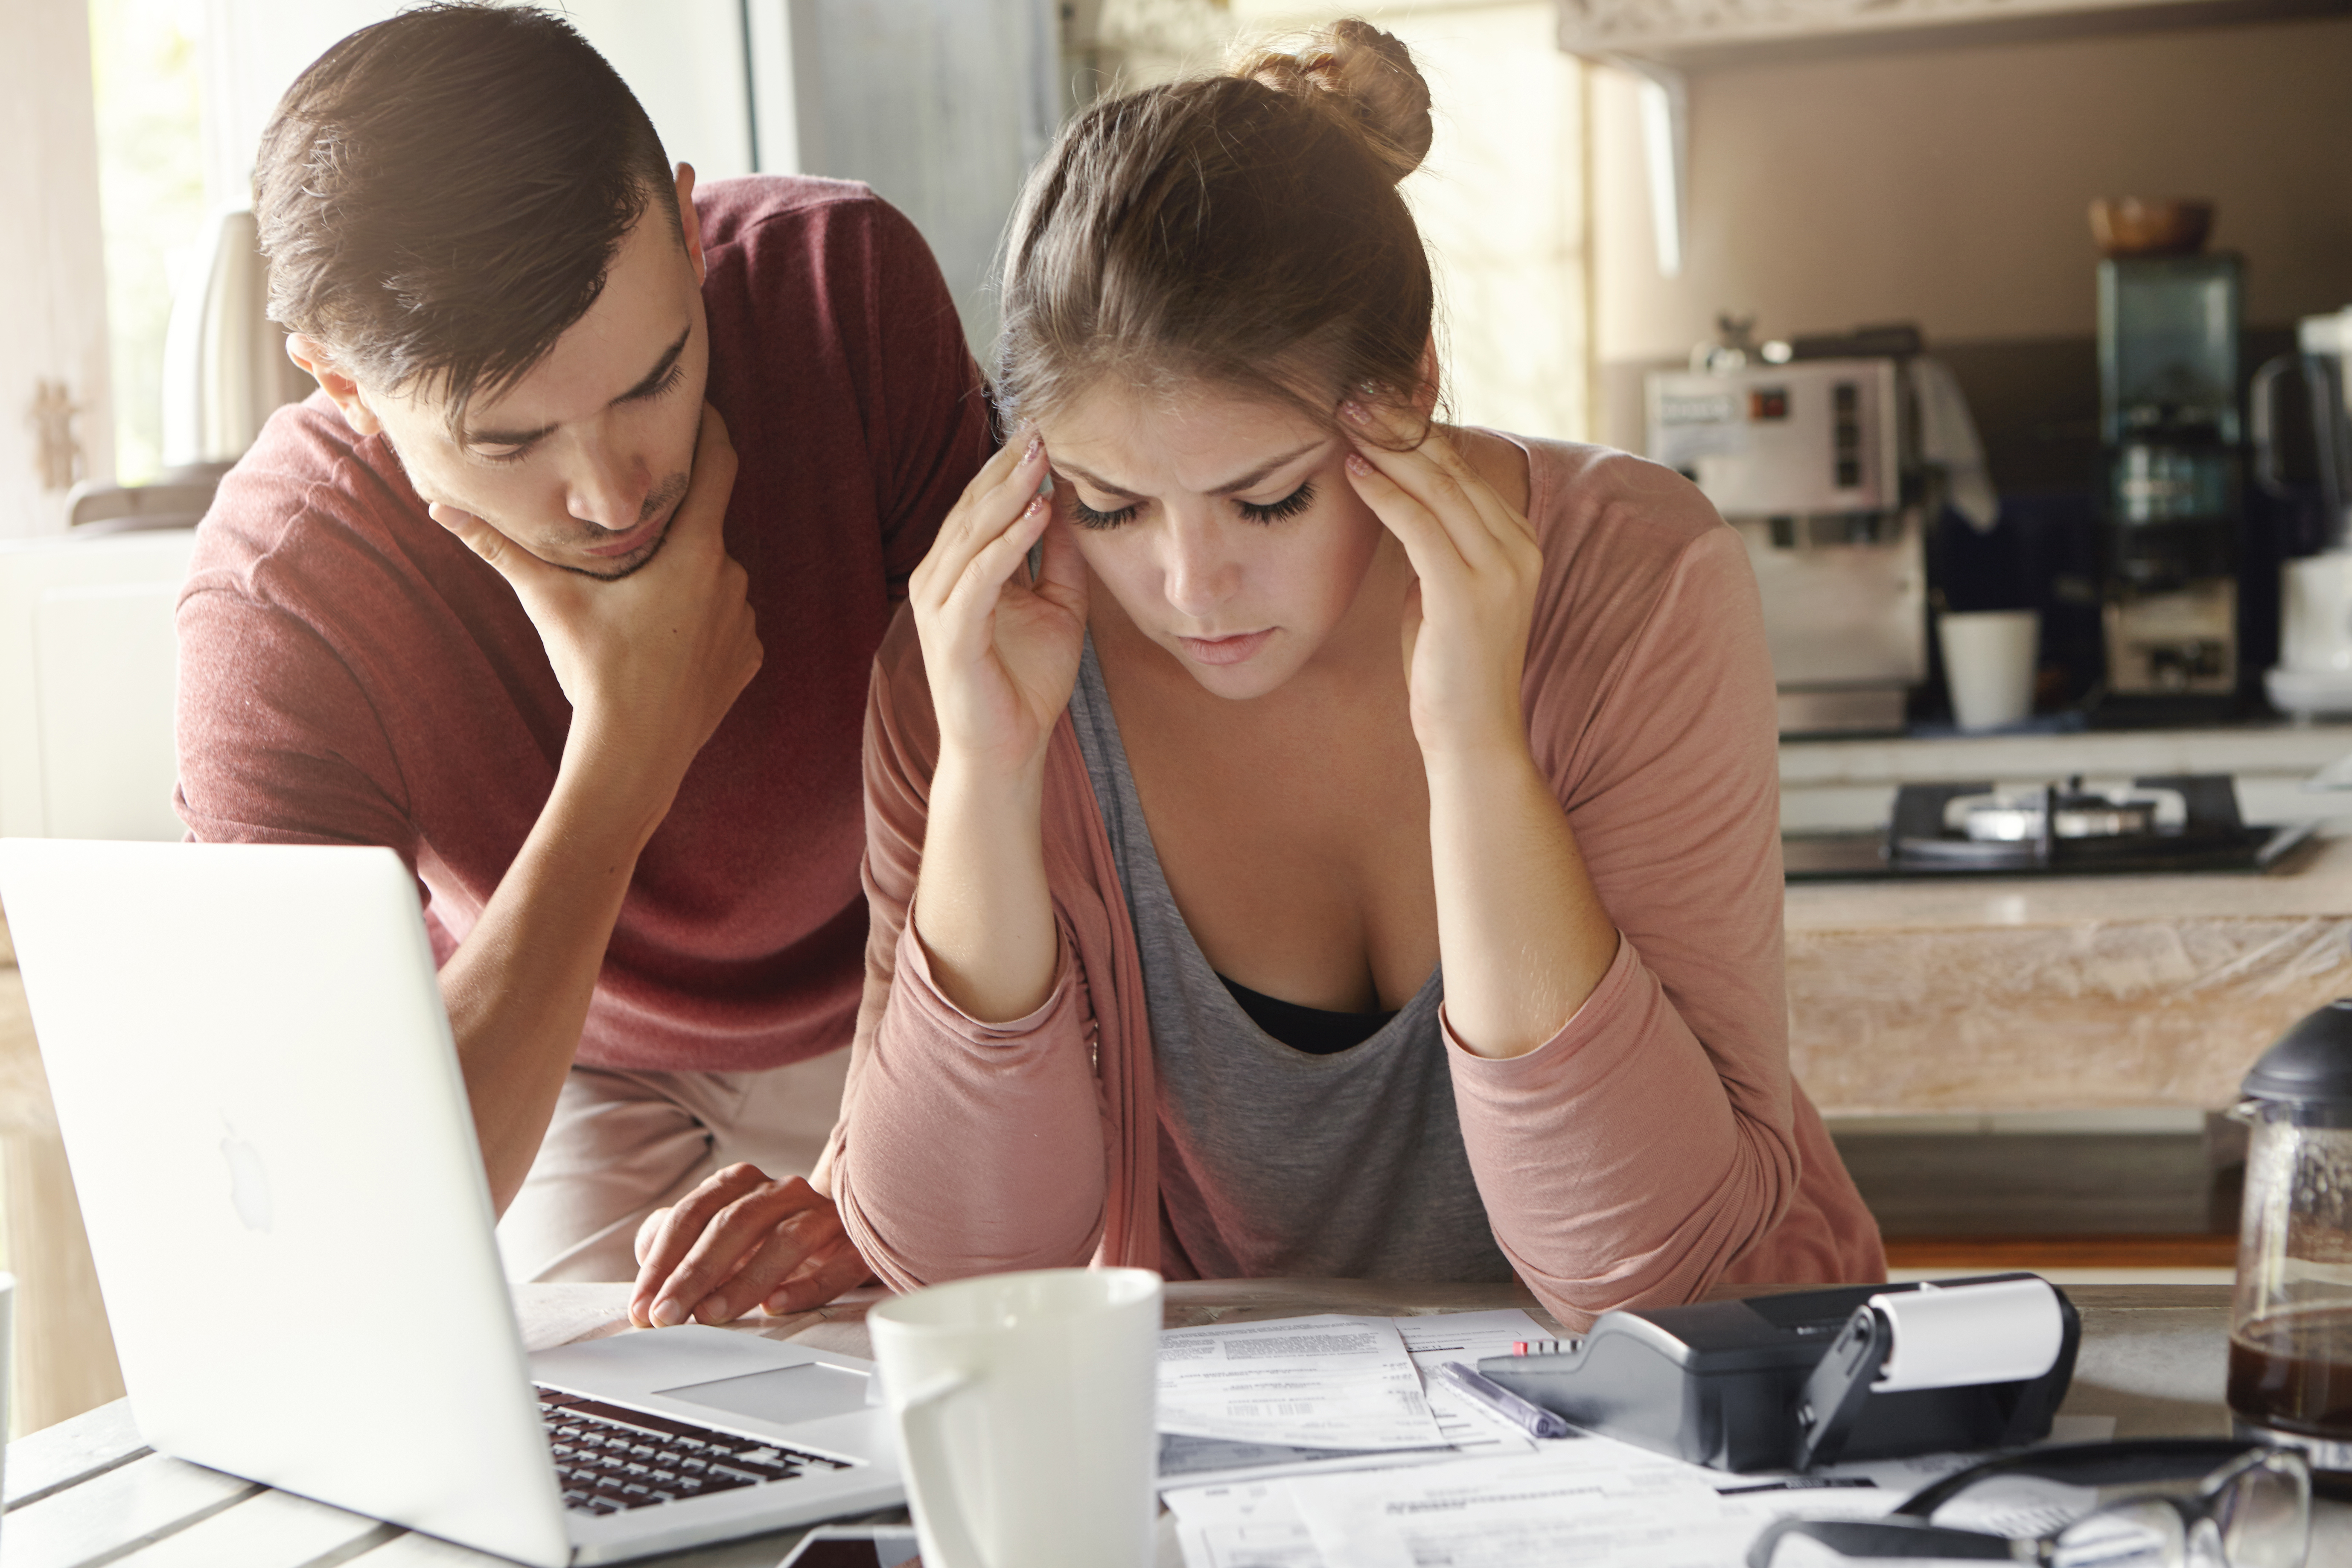 Young family with many debts facing financial stress. Unemployed male looking pensive standing next to his depressed wife with headache who is calculating expenses, trying to make both ends meet